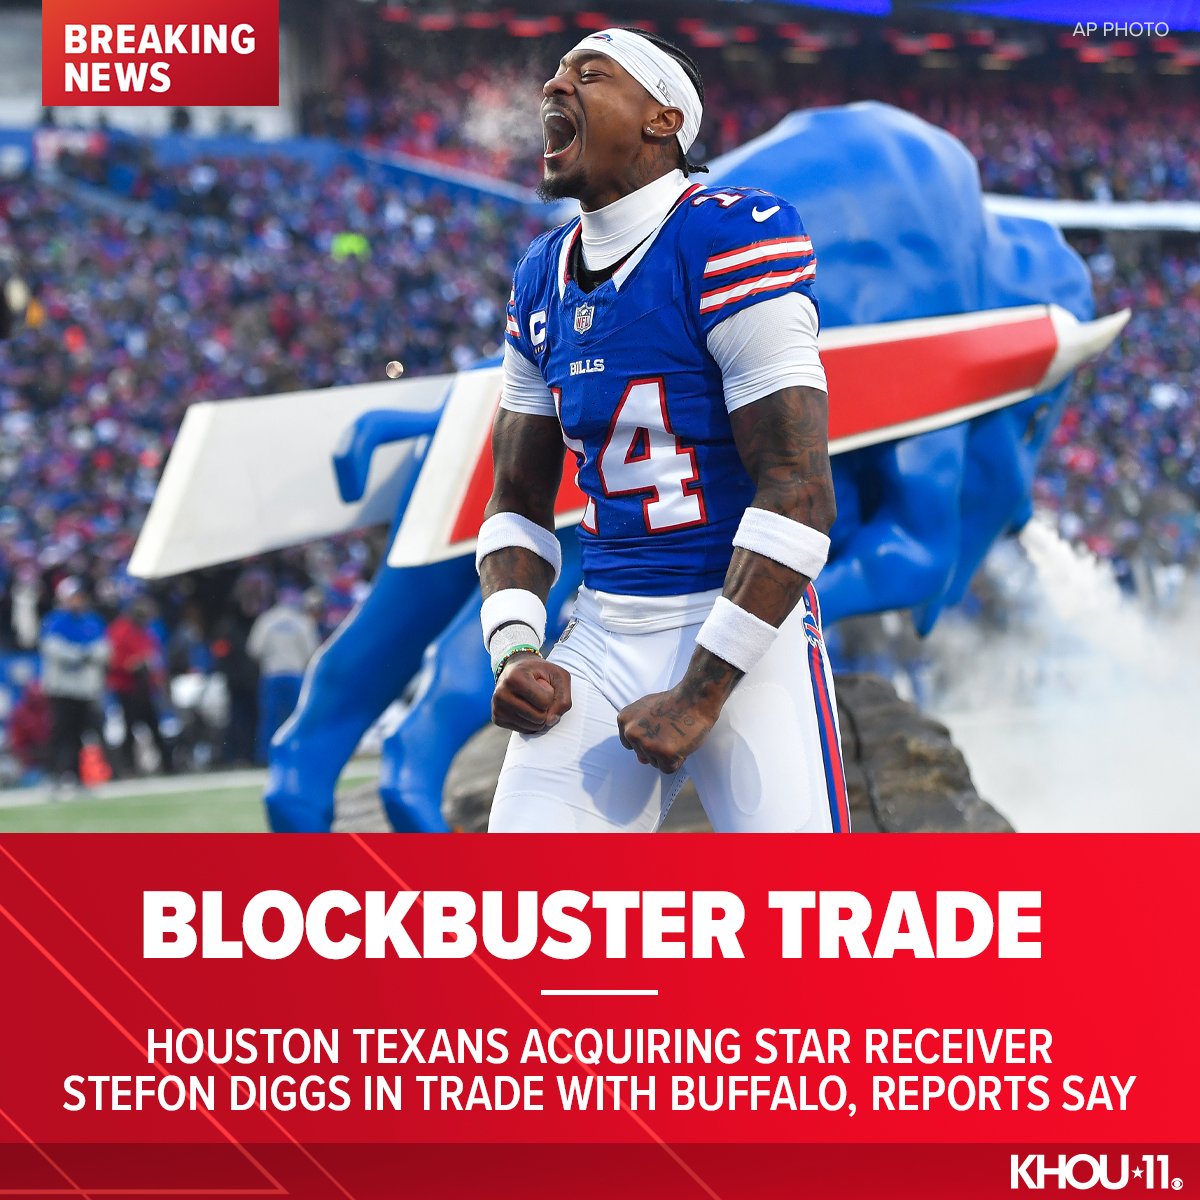 BLOCKBUSTER TRADE | The @HoustonTexans are acquiring four-time Pro Bowl wide receiver Stefon Diggs from the Buffalo Bills, according to multiple reports. LATEST: khou.com/article/sports…